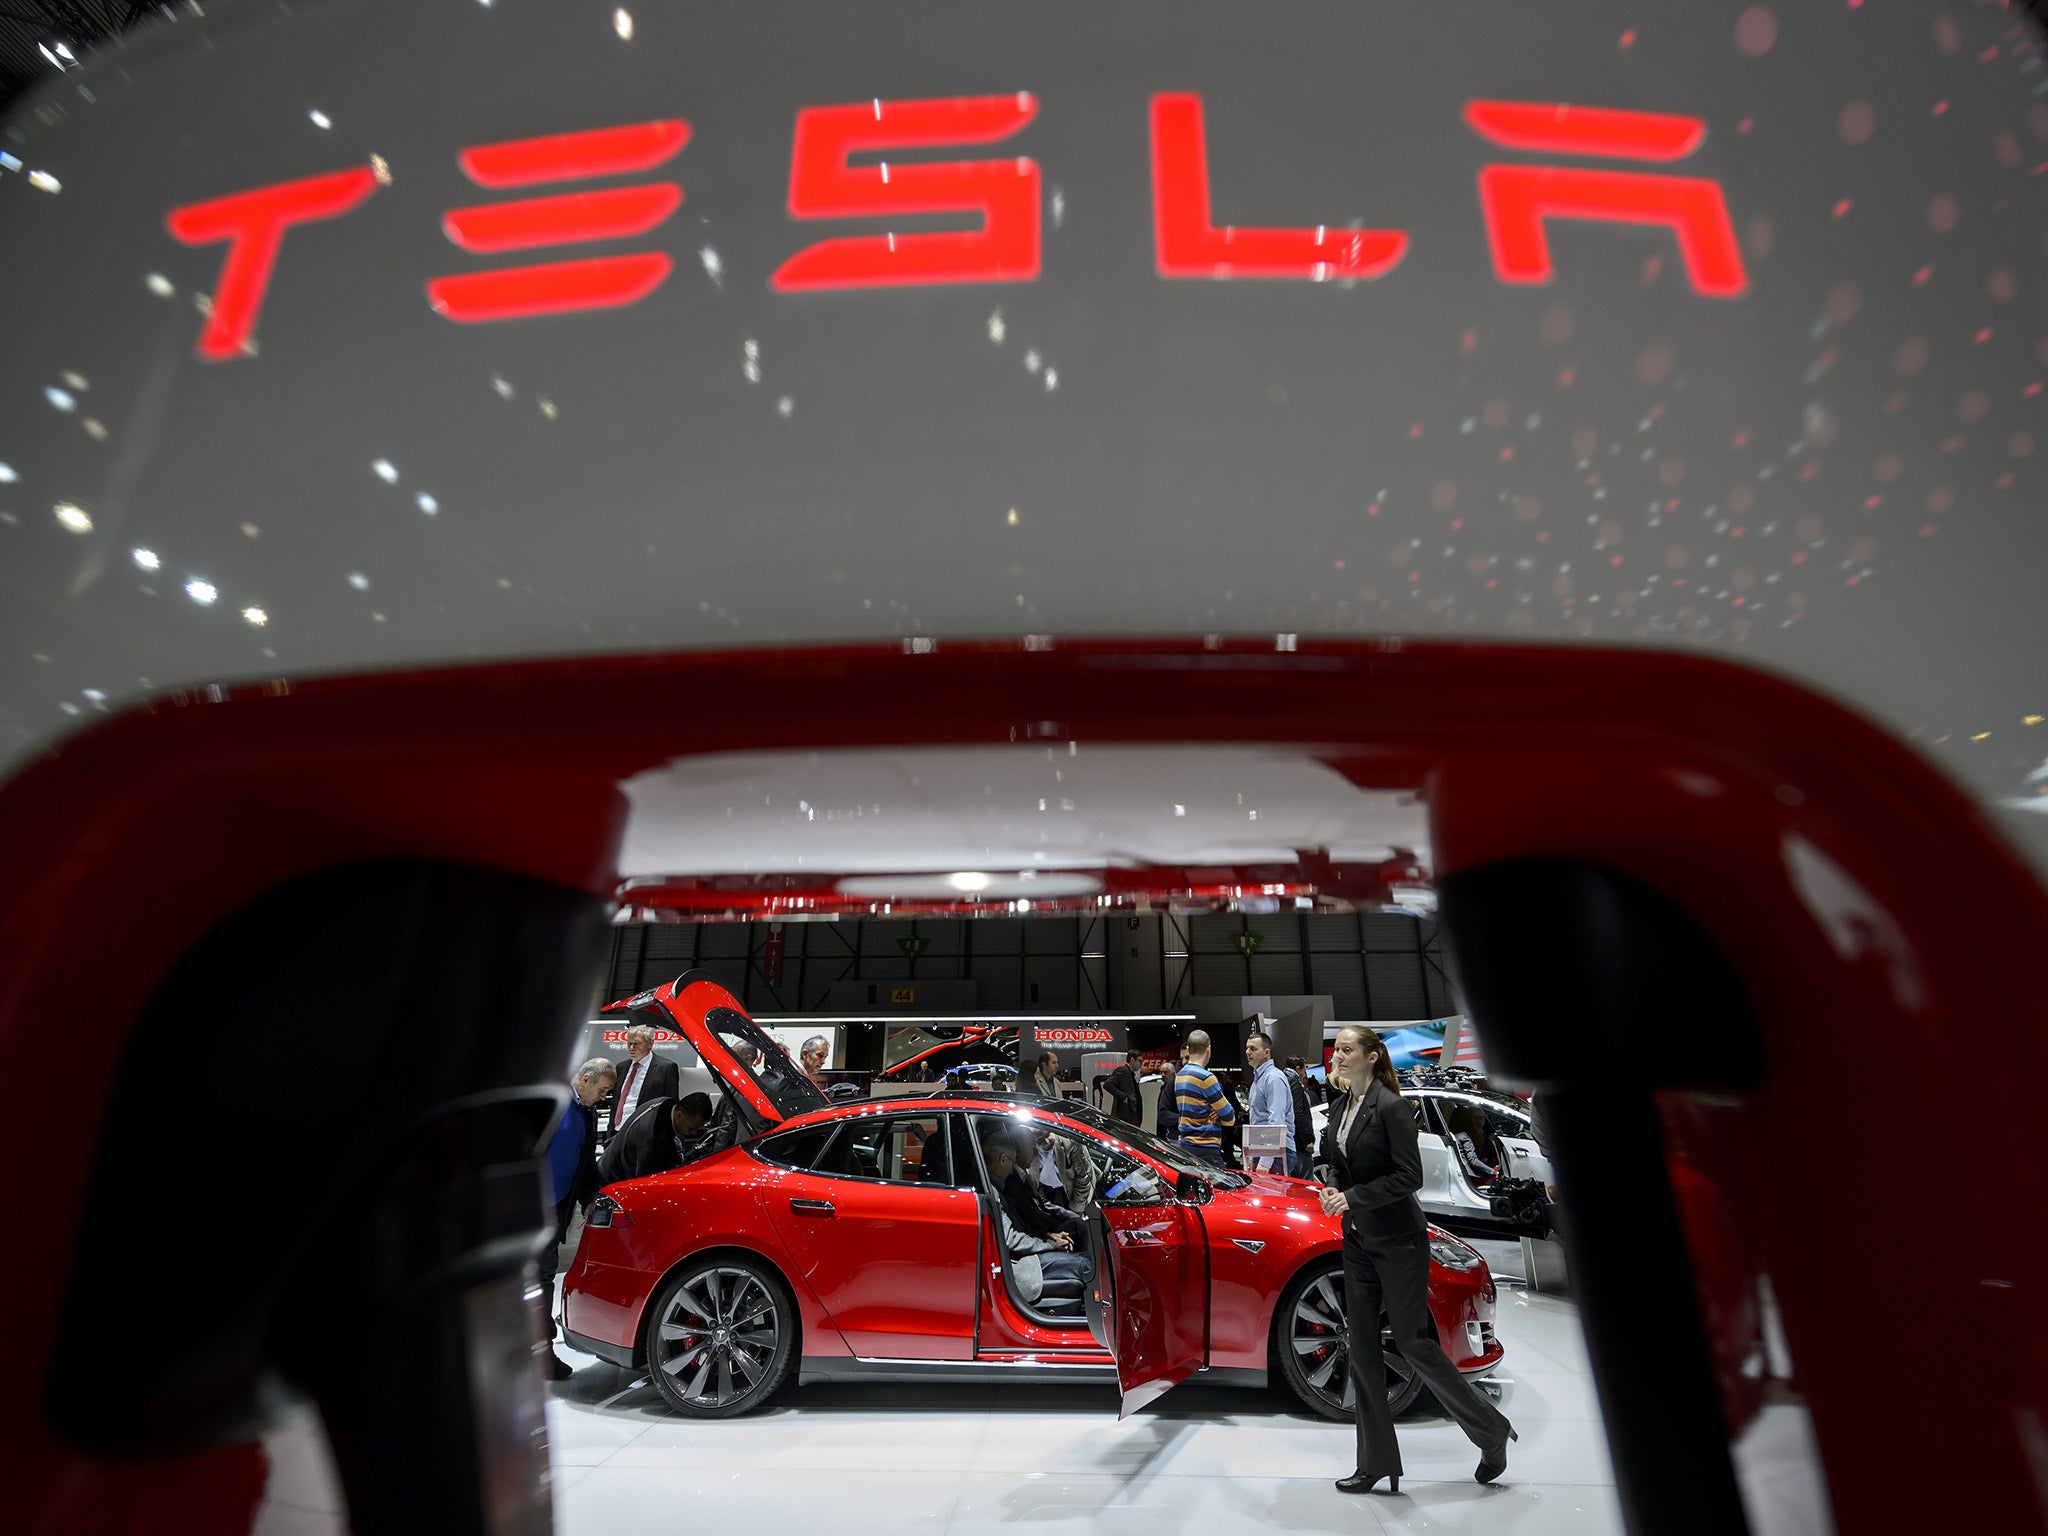 Tesla's acceleration into electric long-haul vehicles has been met with scepticism from some experts